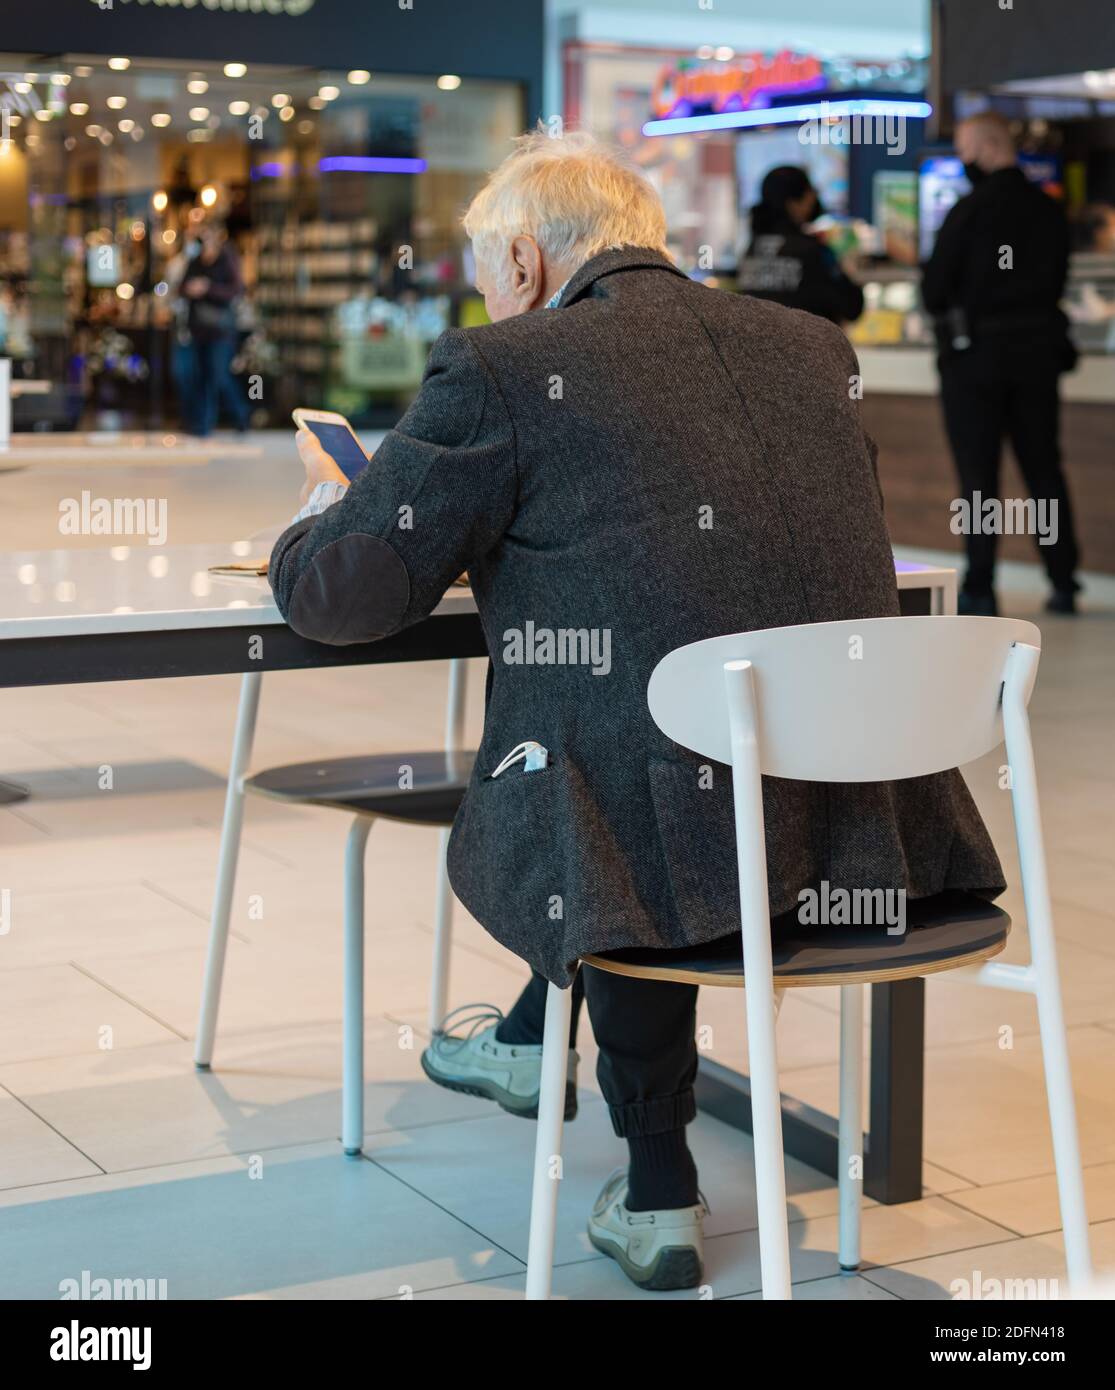 Back view of an old man 70-75 years sitting in a cafeteria and using his smartphone. Side view, street view. Stock Photo